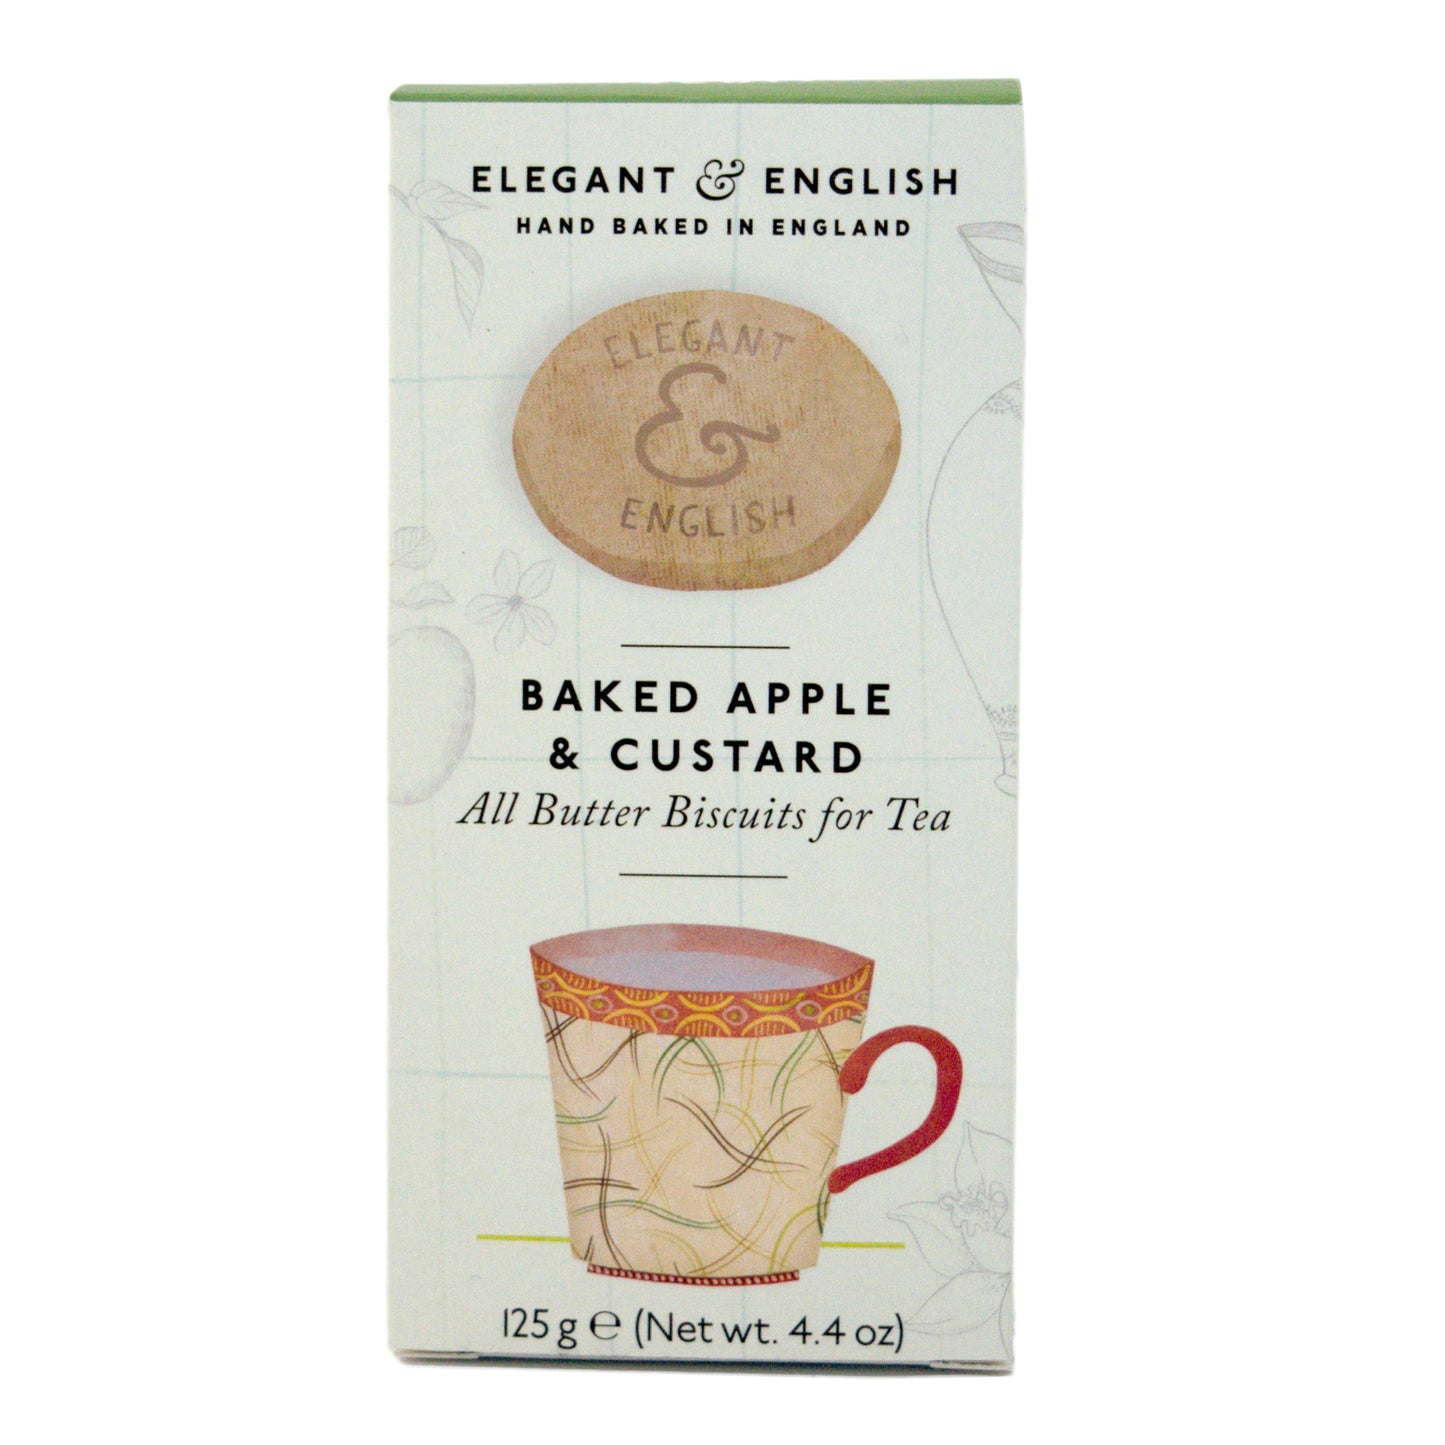 ARTISAN BISCUITS Baked Apple & Custard Biscuits     Size - 6x125g